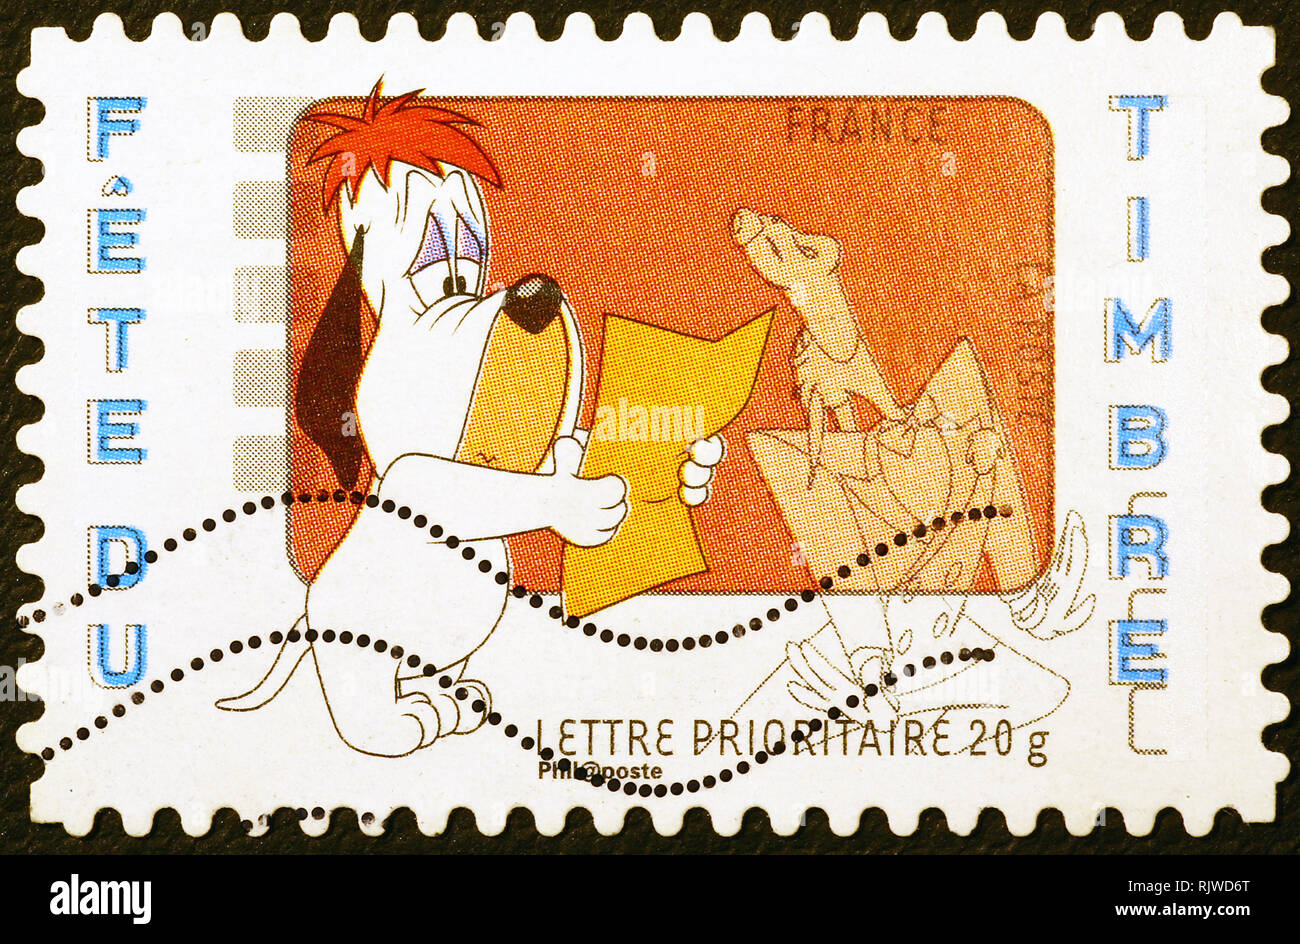 Cartoon by Tex Avery on french postage stamp Stock Photo